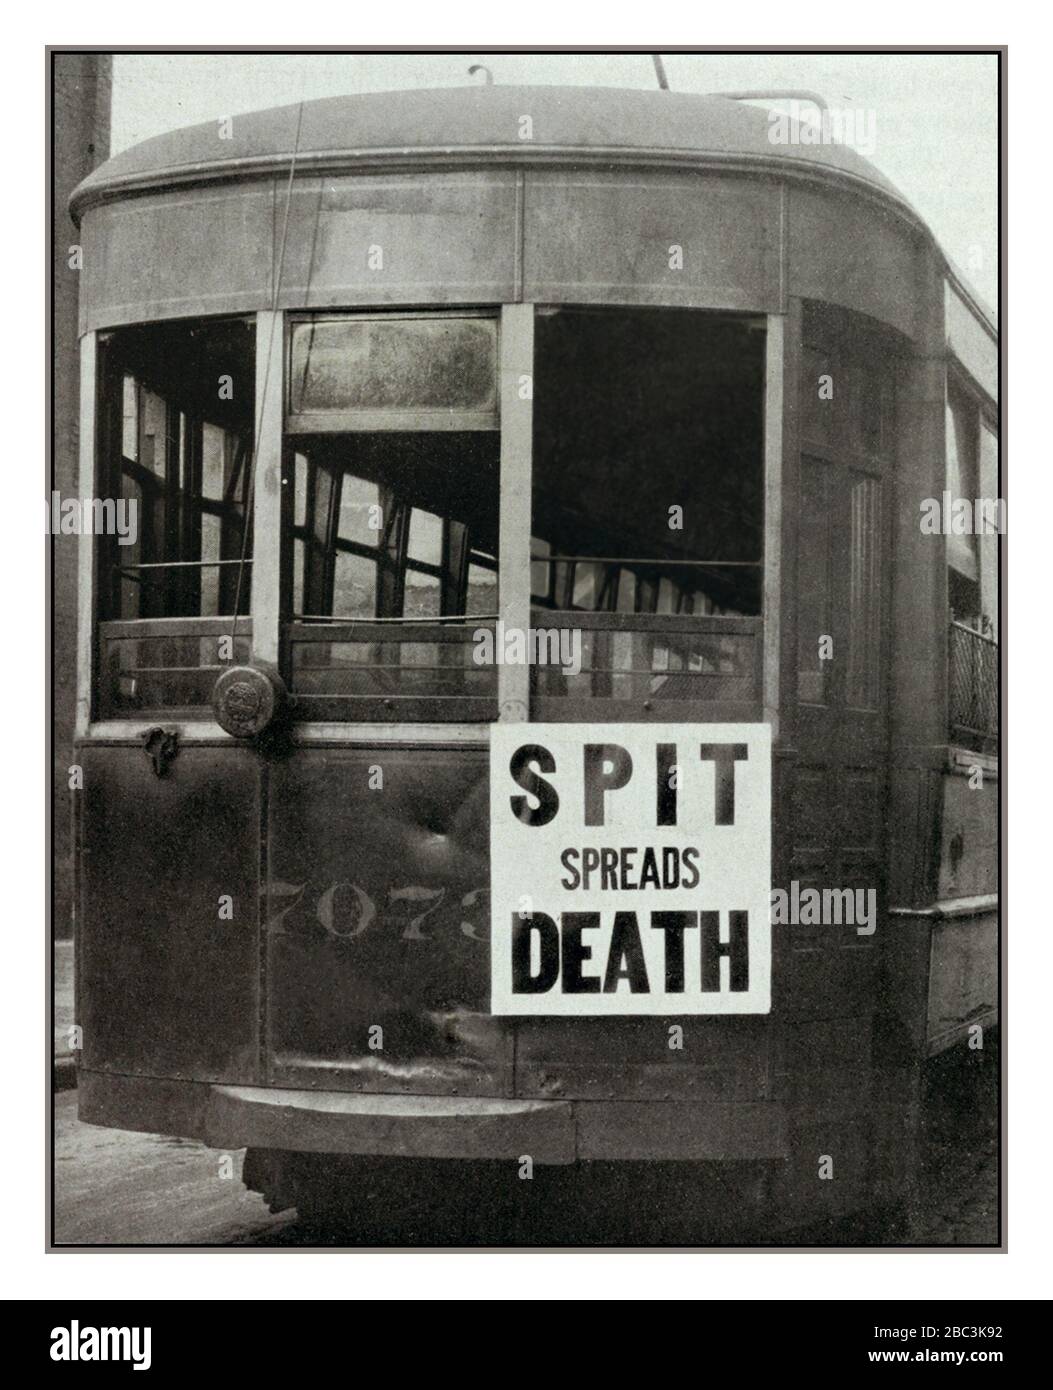 PANDEMIC SPANISH FLU Archive 1900s USA Philadelphia tram streetcar with a poster saying "SPIT SPREADS DEATH" during the 1918-1919 Influenza Pandemic, also known as the Spanish Flu. USA concept for CORONAVIRUS Covid-19 Stock Photo